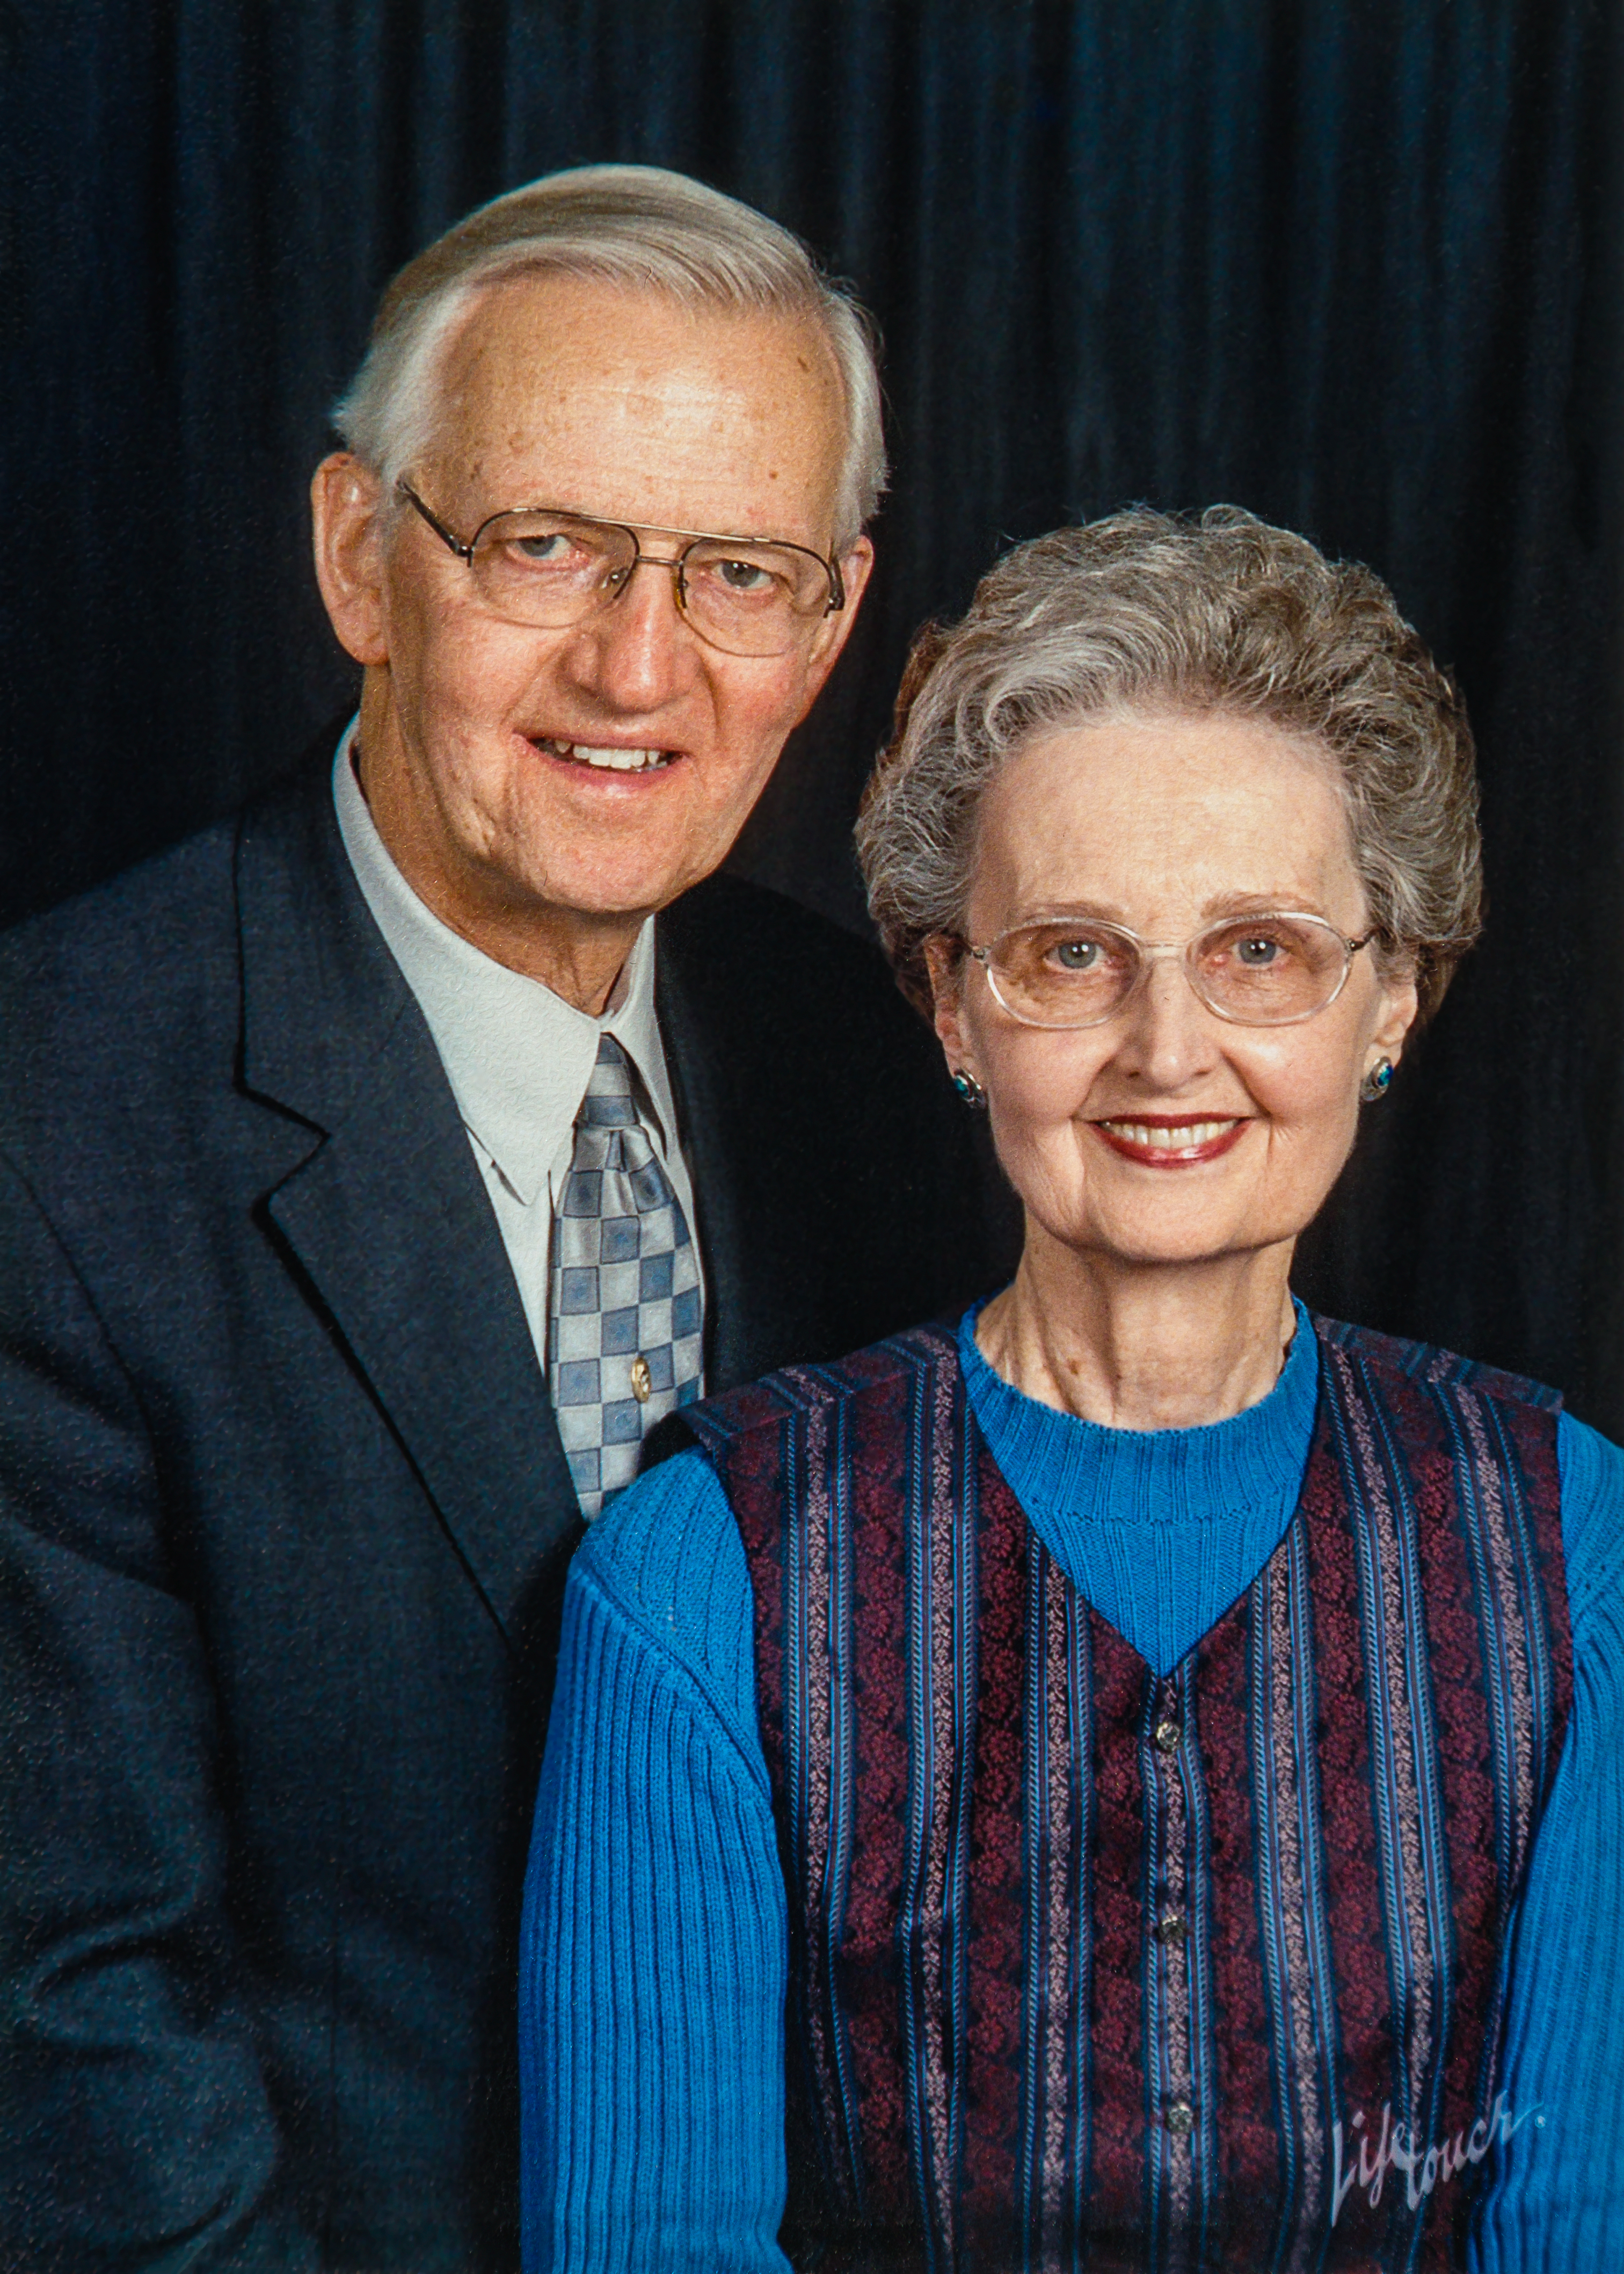 In 2019, Sandy and Donna Hastie established the Dwight and Gwen Gustafson Music Scholarship Endowment for BJU music students